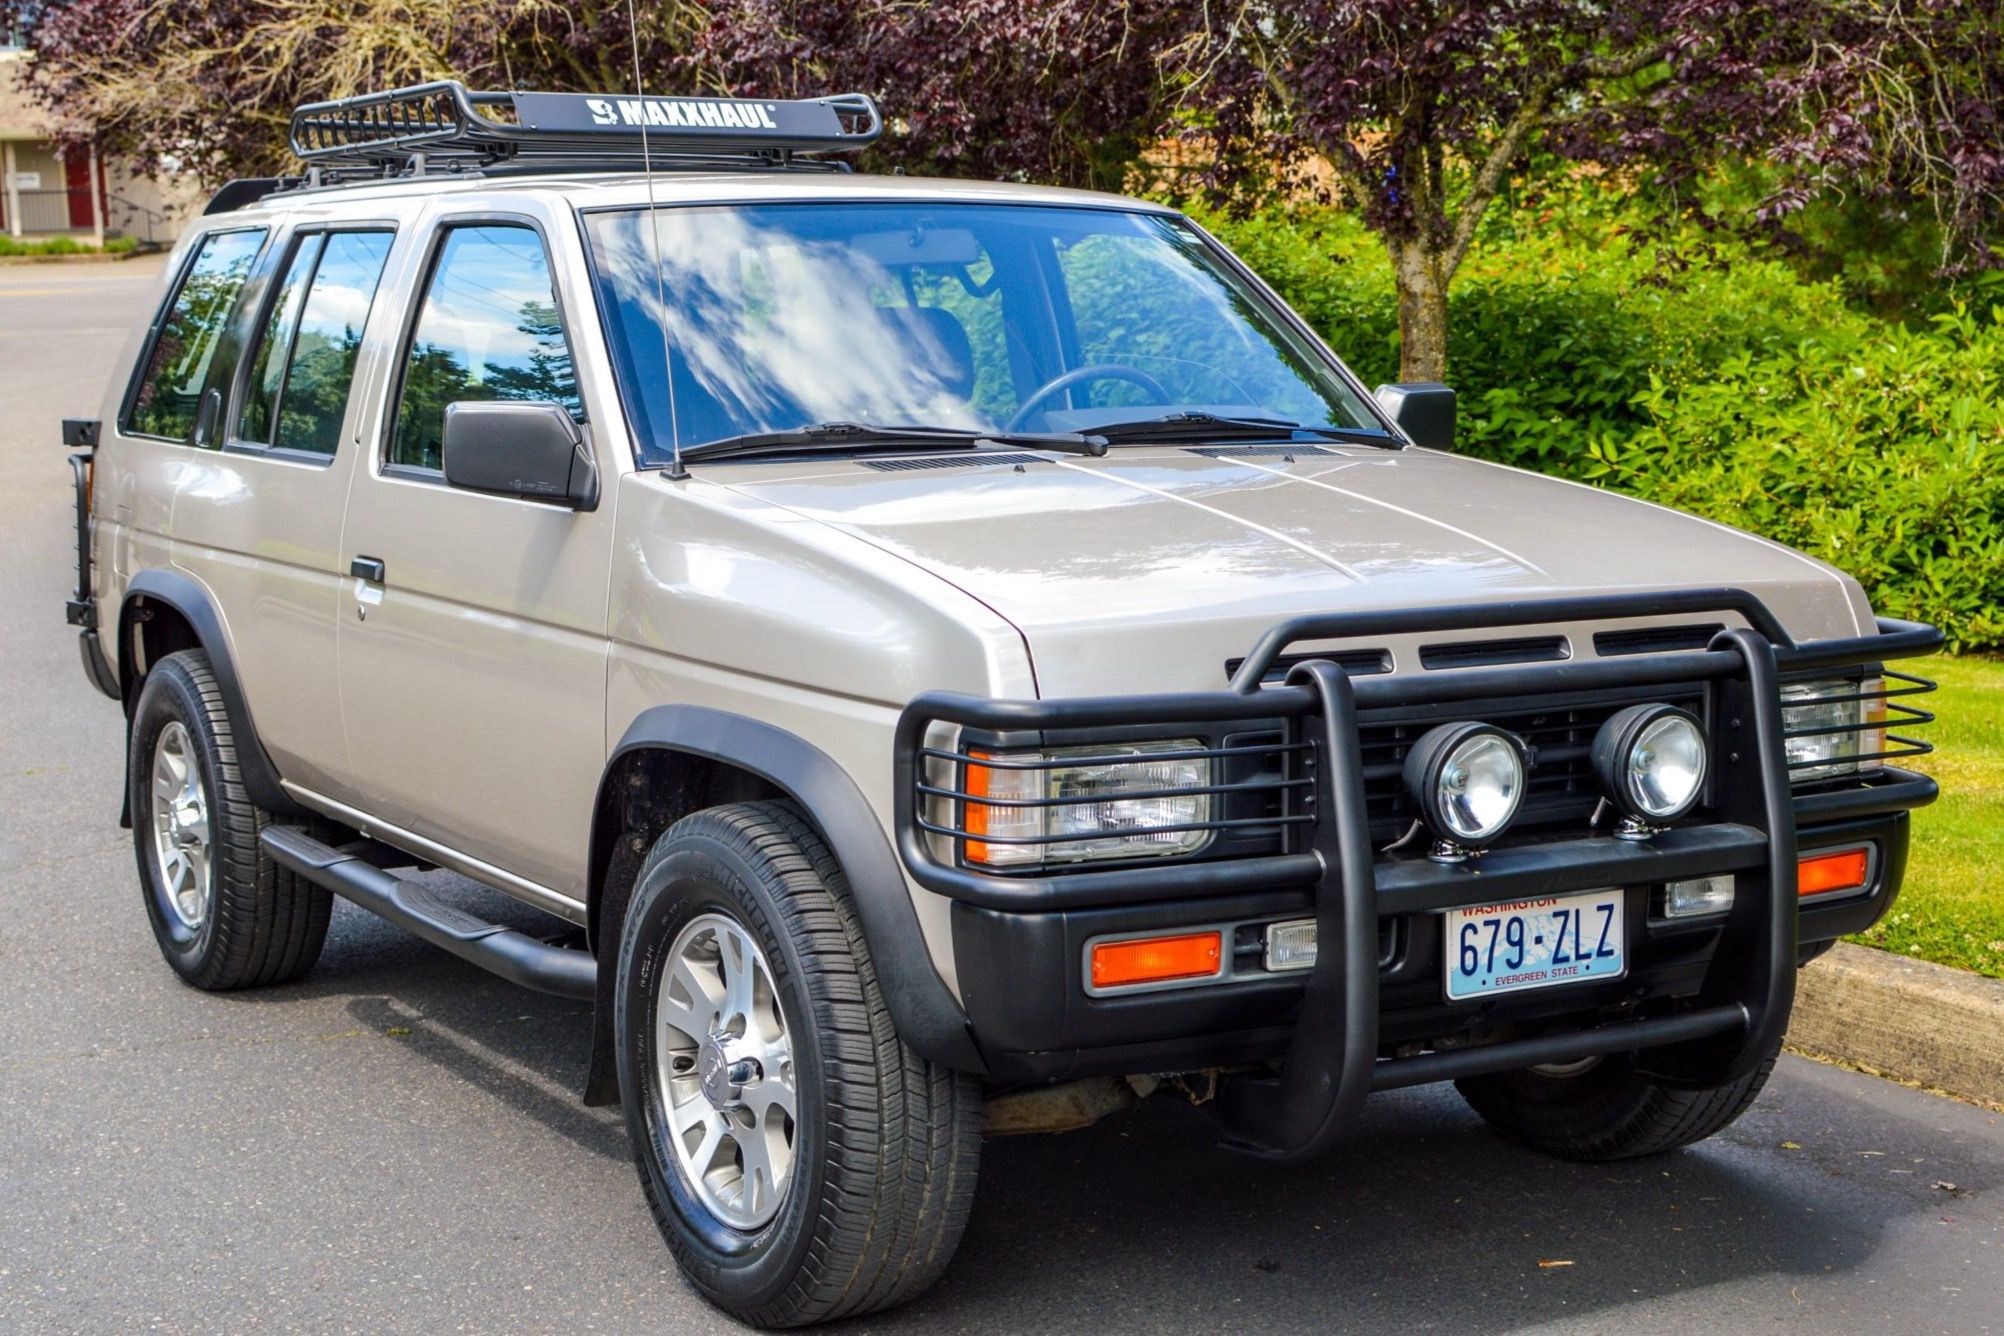 The First Generation Nissan Pathfinder Is A Cheap And Reliable OffRoader